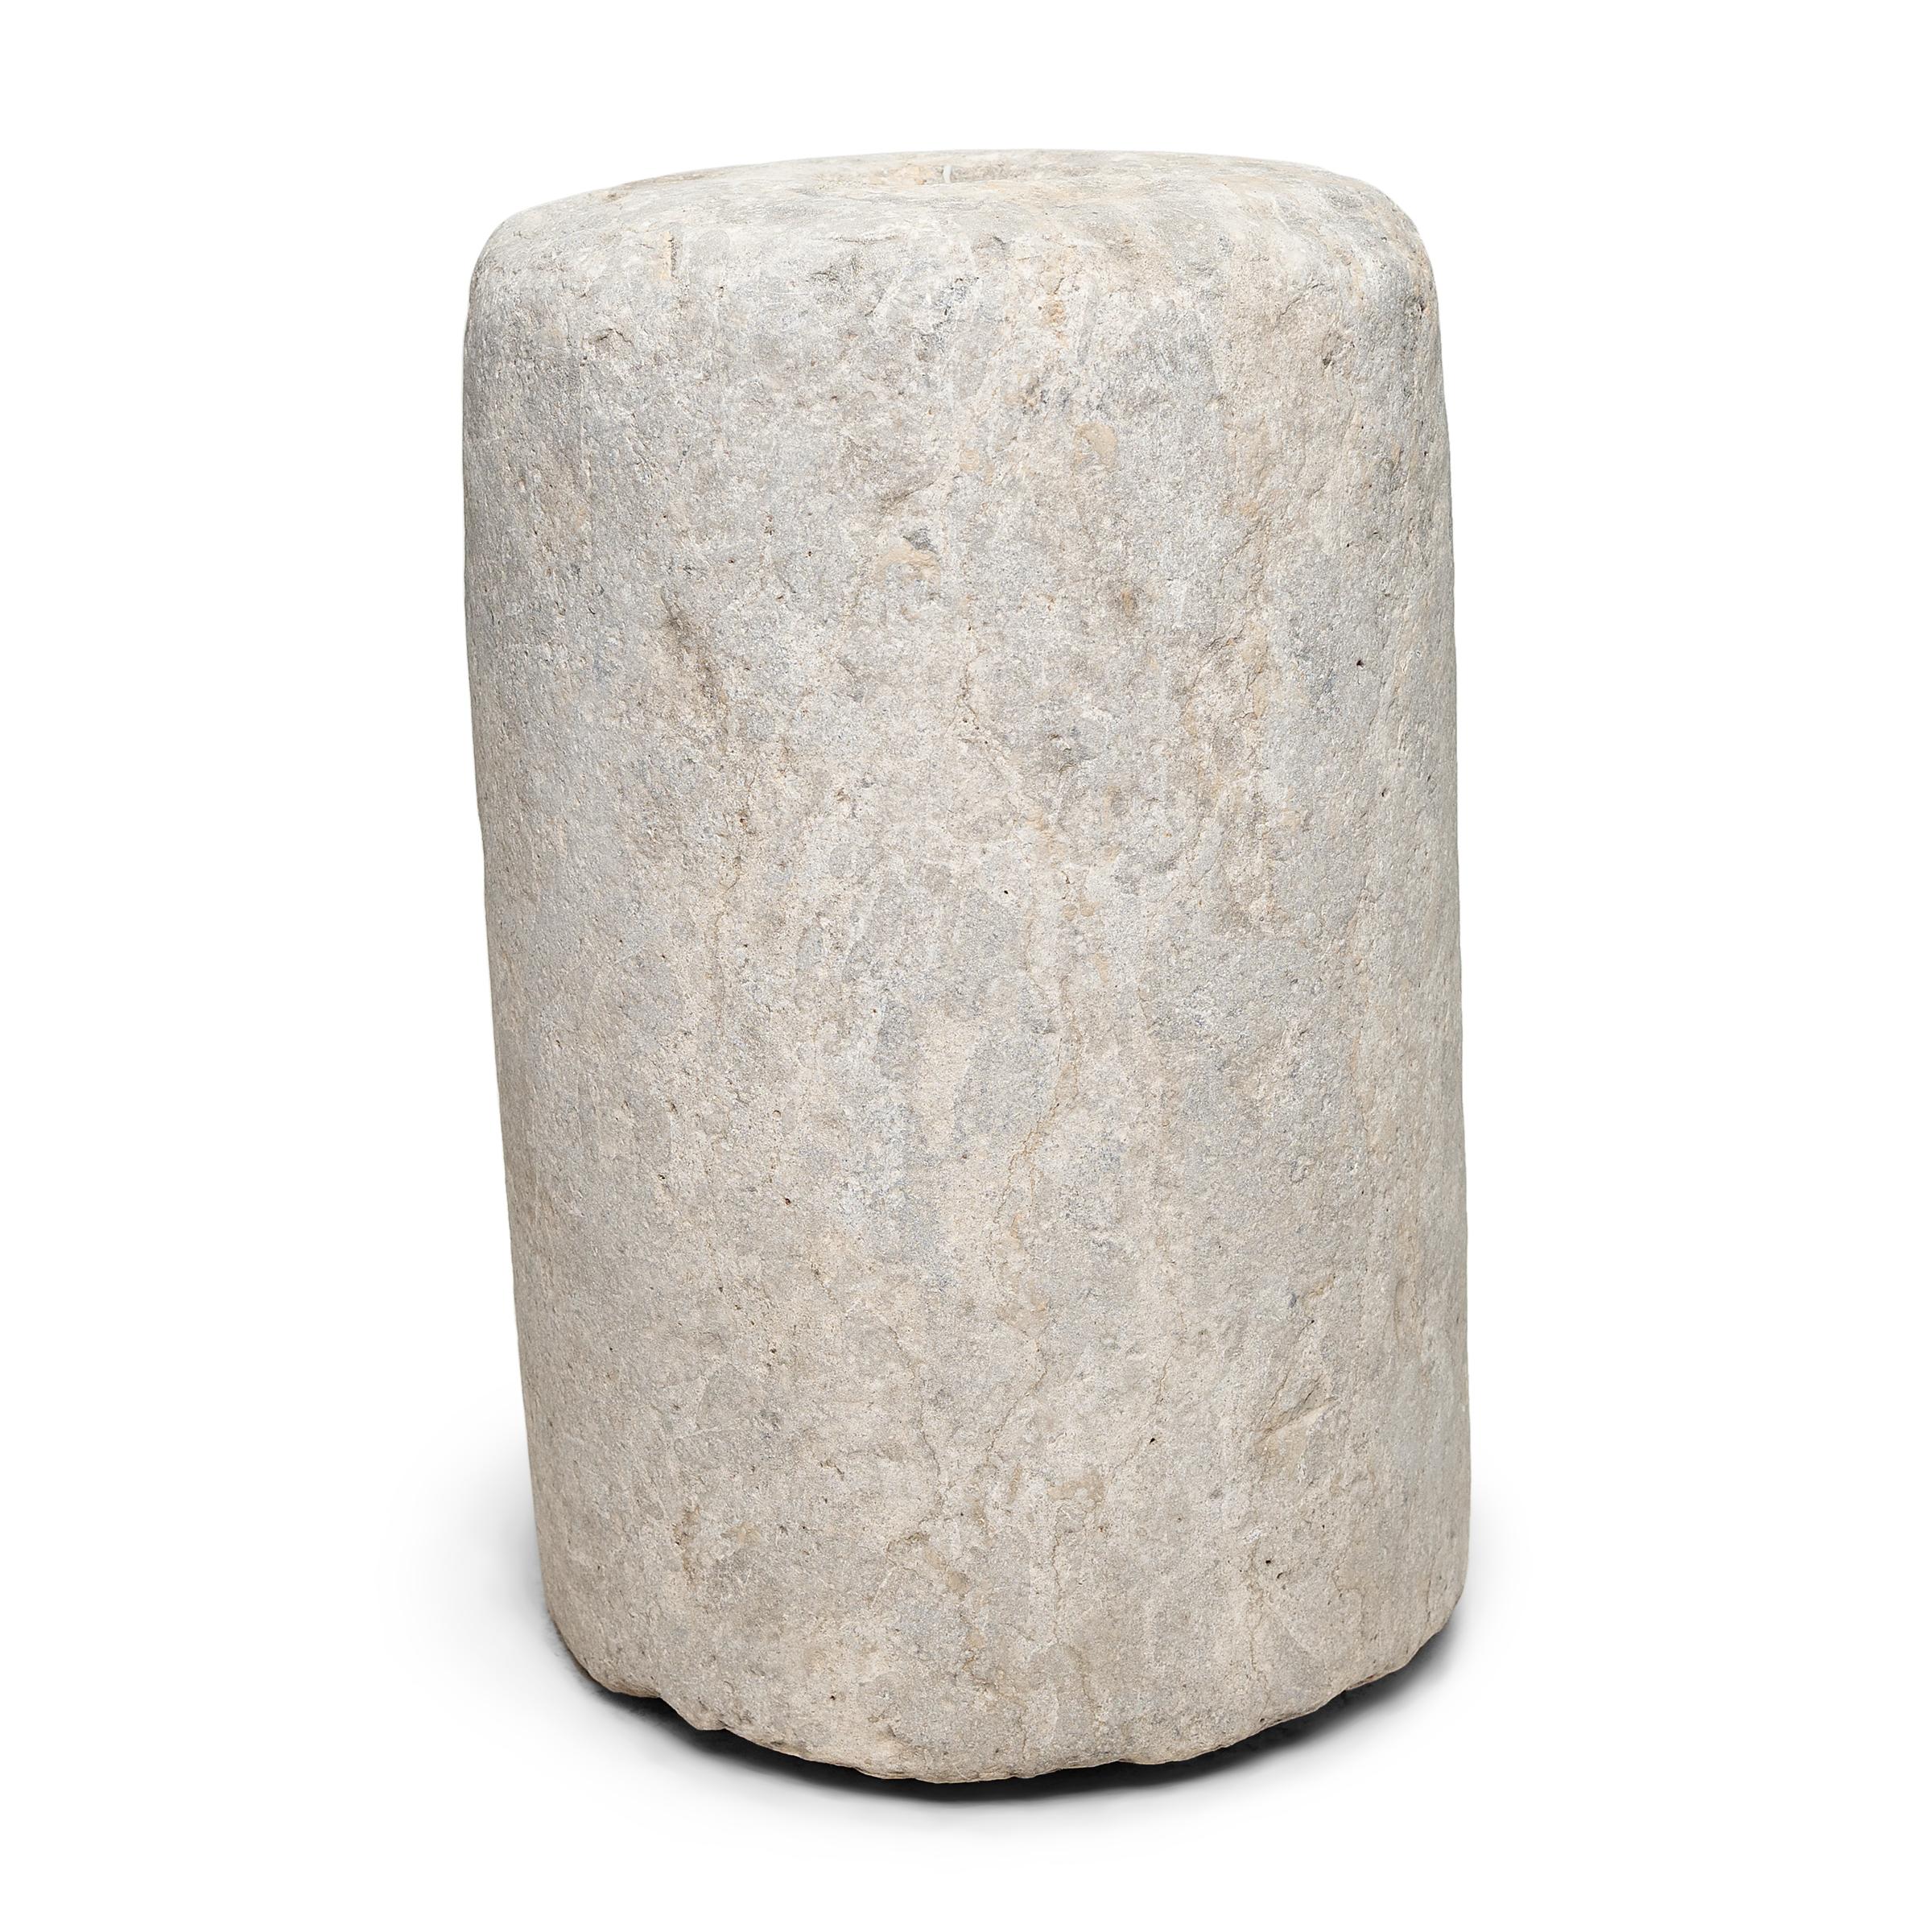 This low stone pedestal is an early 19th-century mill stone or roller stone, used for threshing grain on a farm in China's Shanxi province. The heavy stone would have been would have been pulled across a grain harvest, by man or ox, to separate the